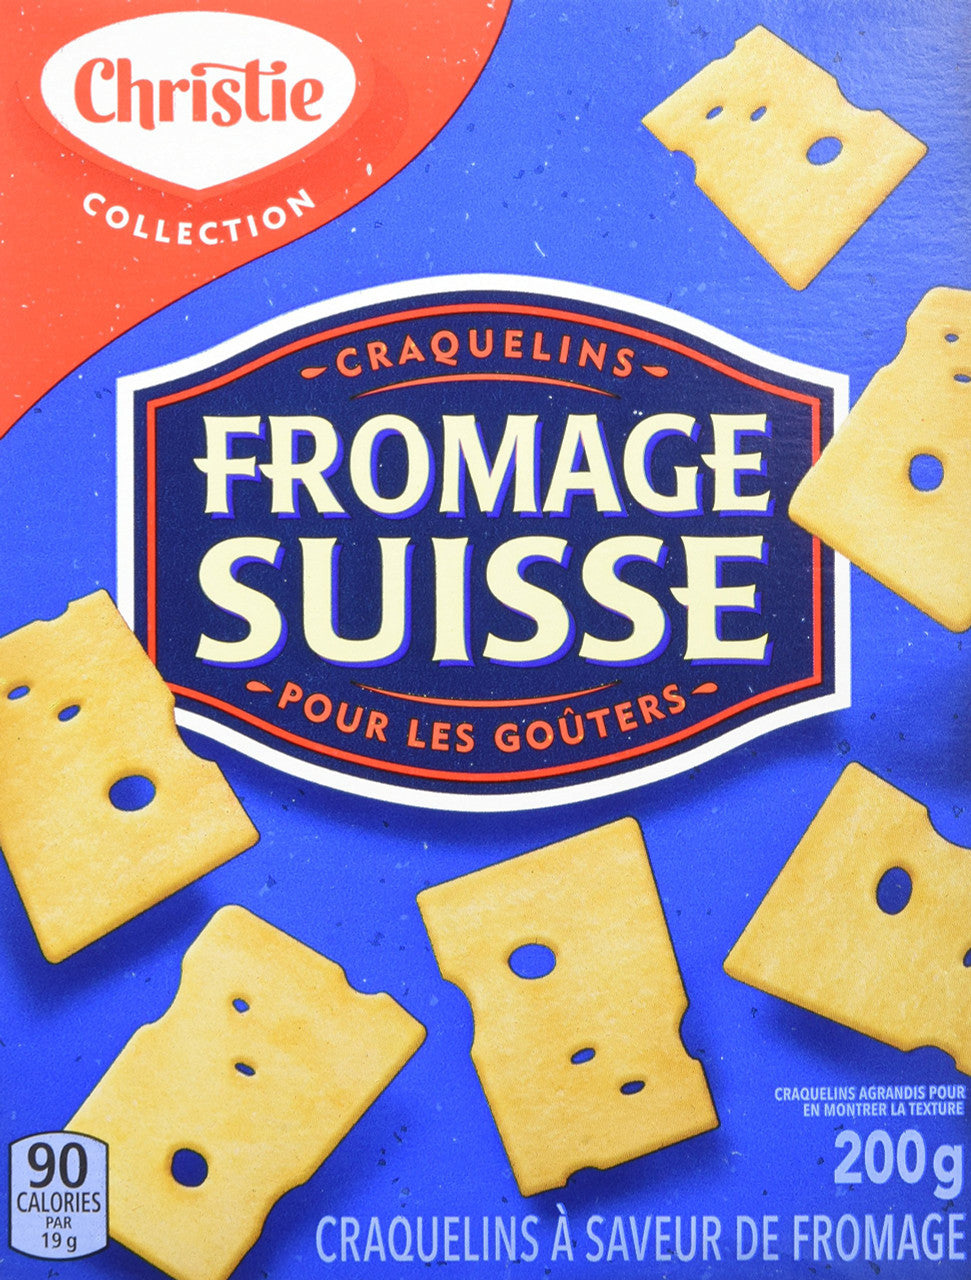 Christie Swiss Cheese Crackers, 200g/7.1oz., {Imported from Canada}